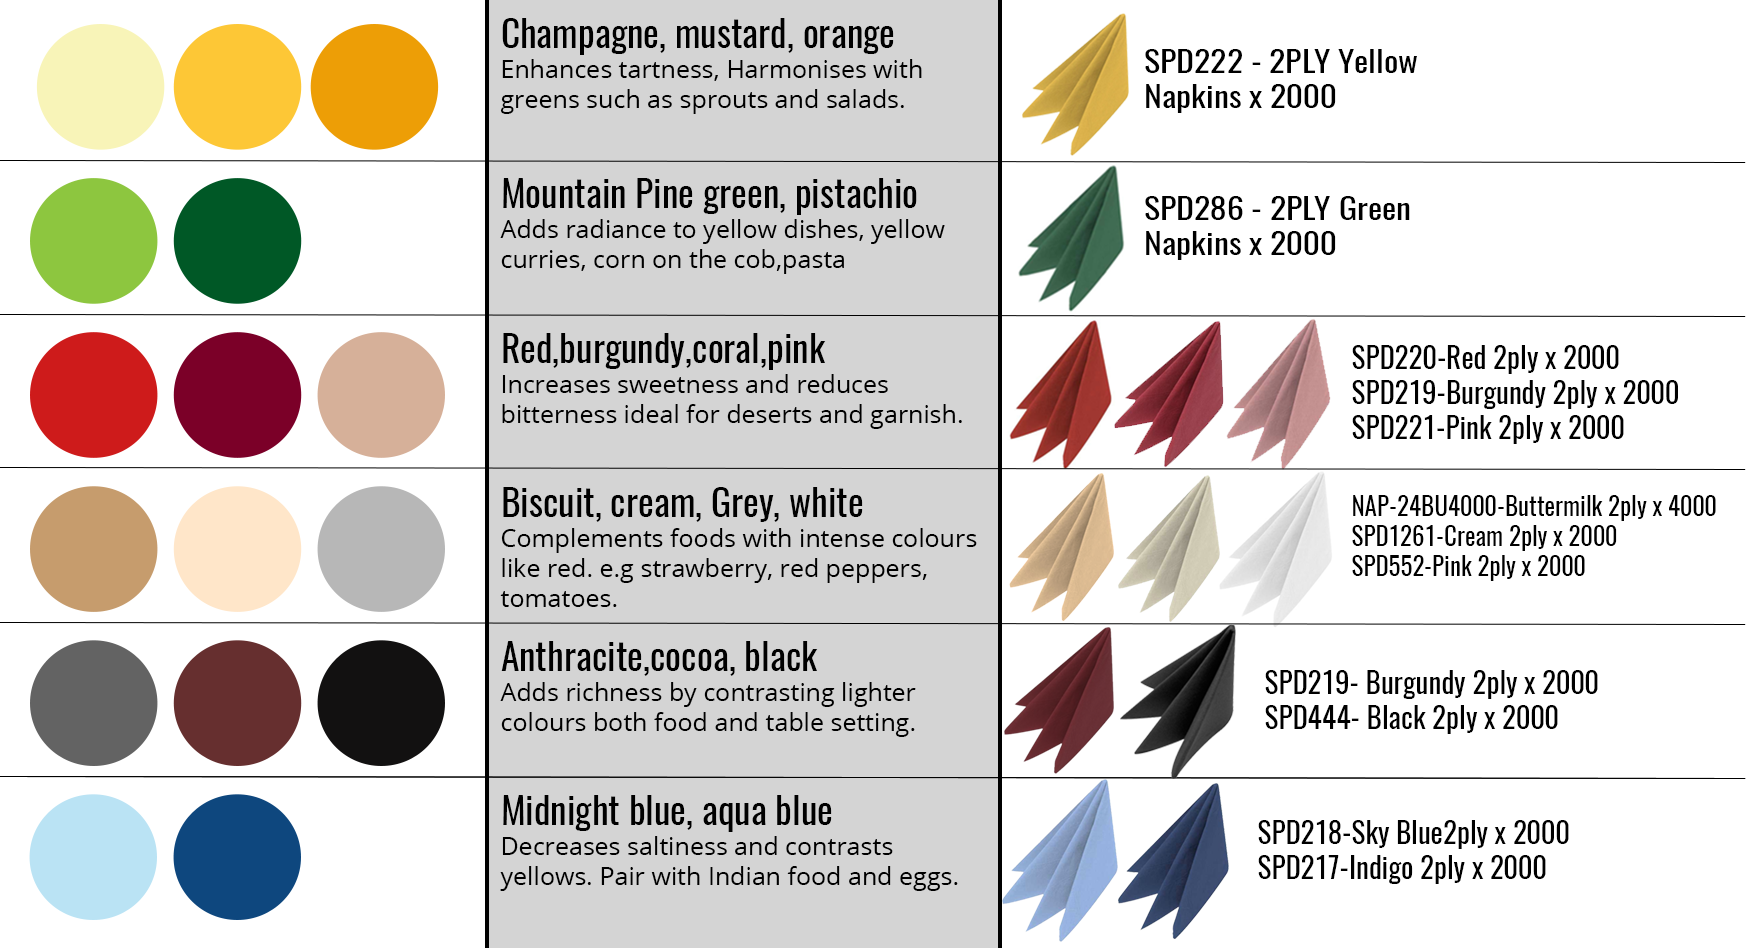 Napkin colour and food pairings